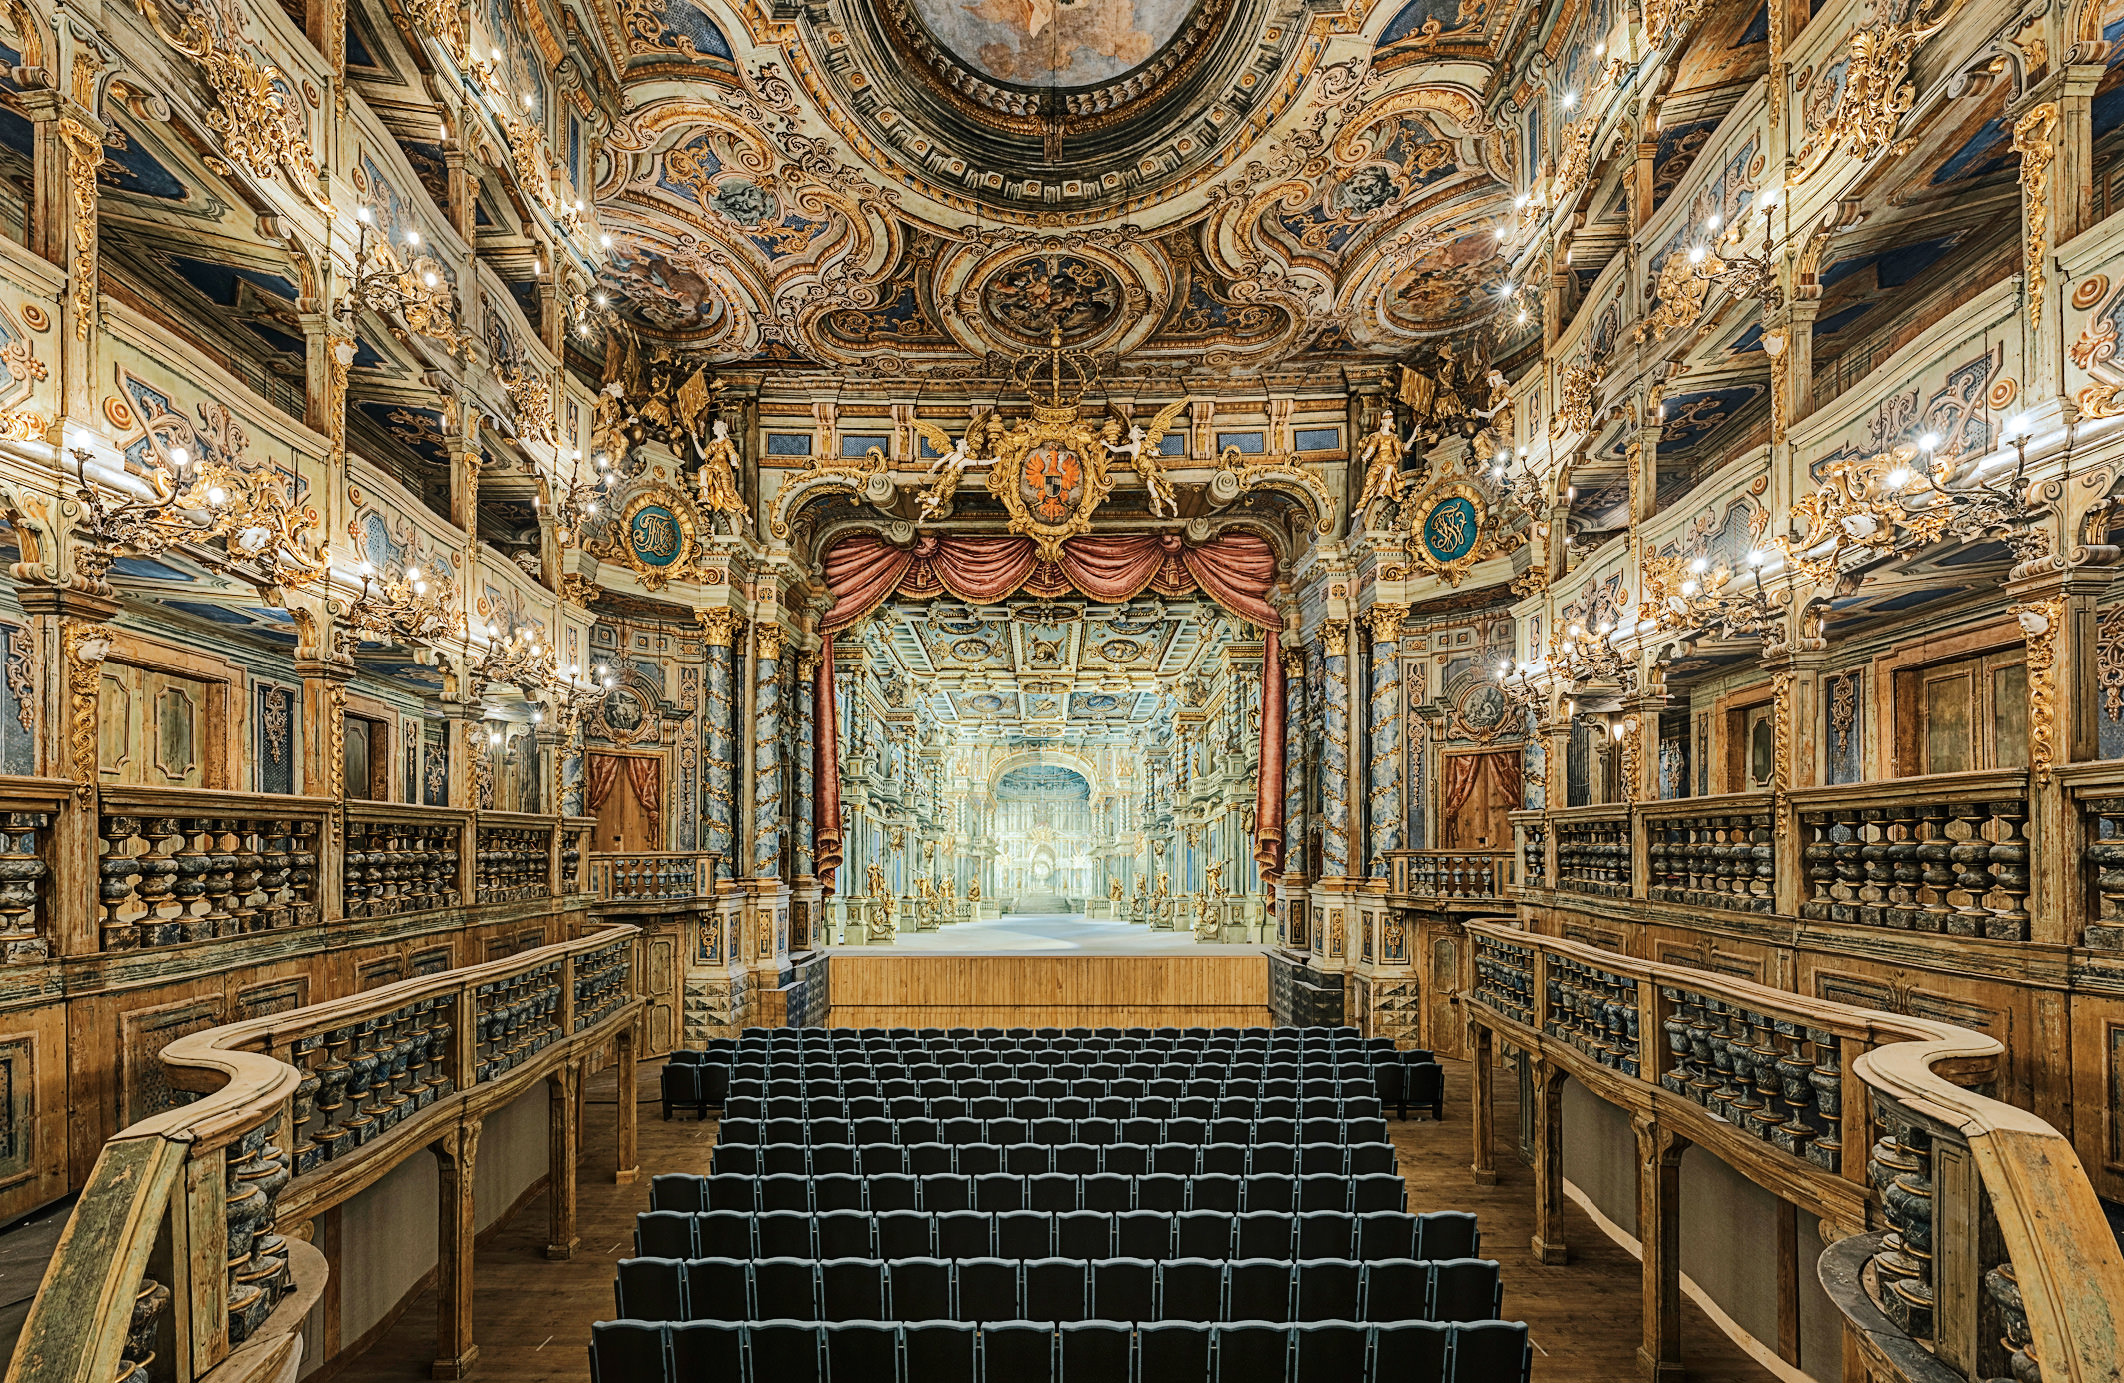 The Margravial Opera House, Inquiring Minds, Spring 2018